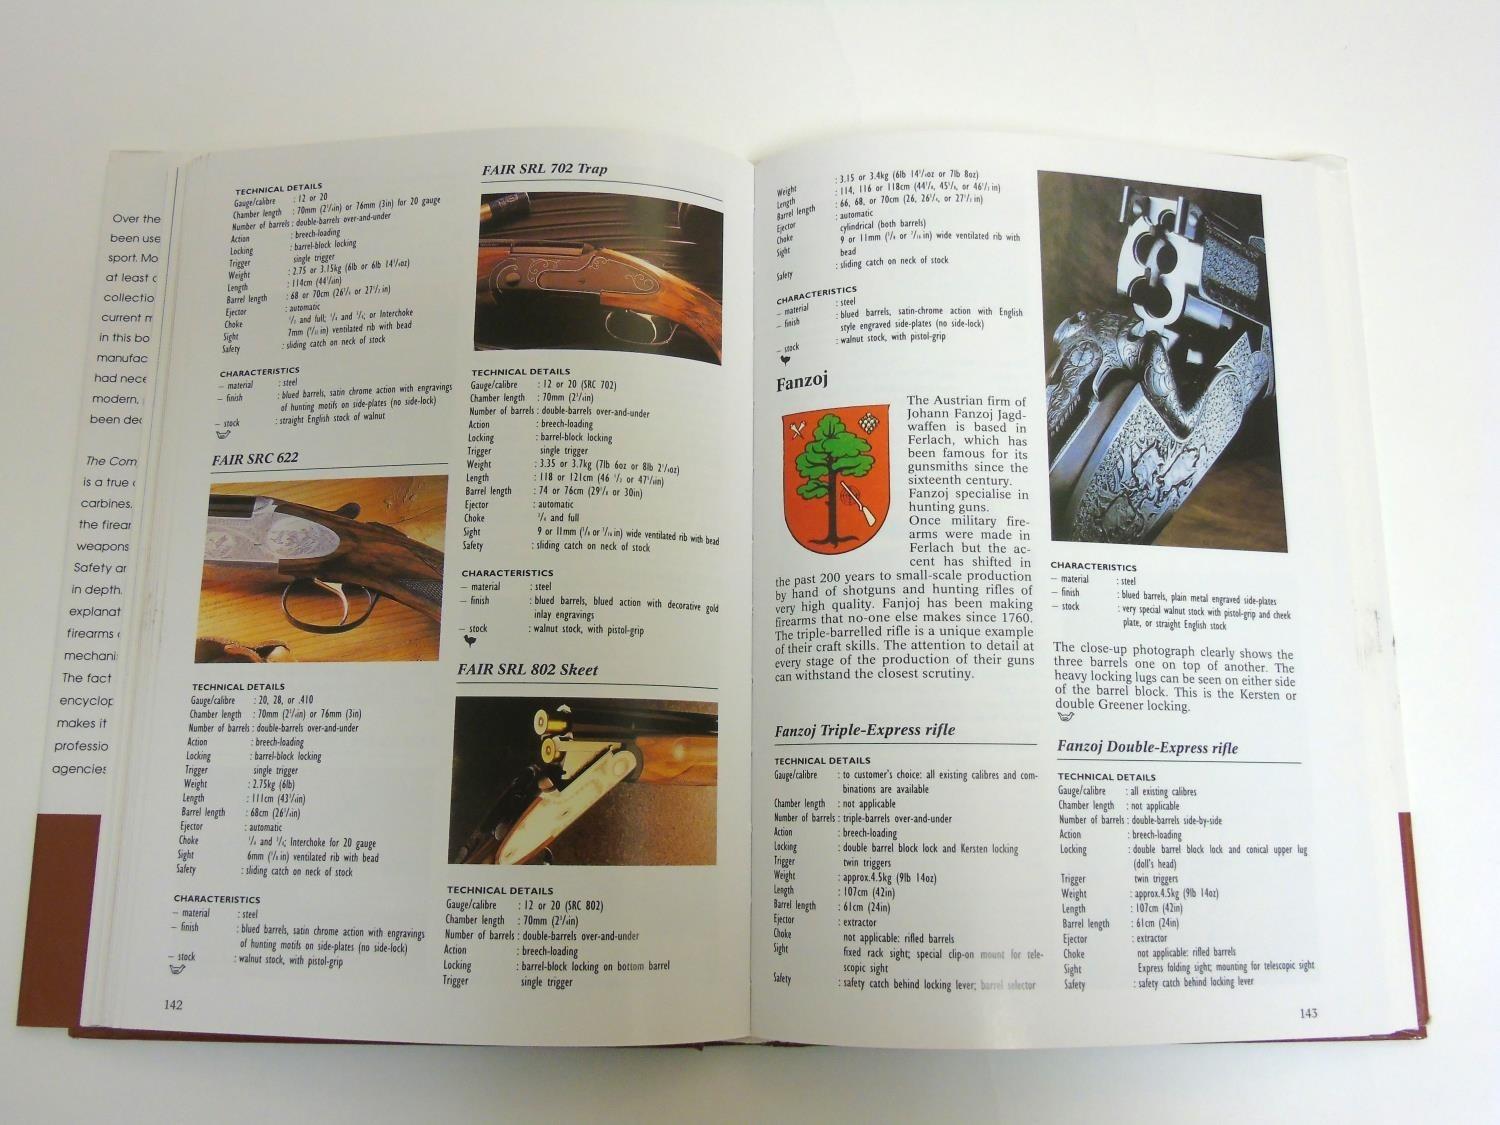 Book: 'The Complete Encyclopedia of Hunting Rifles' by A.E. Hartink, published by Rebo International - Image 2 of 5